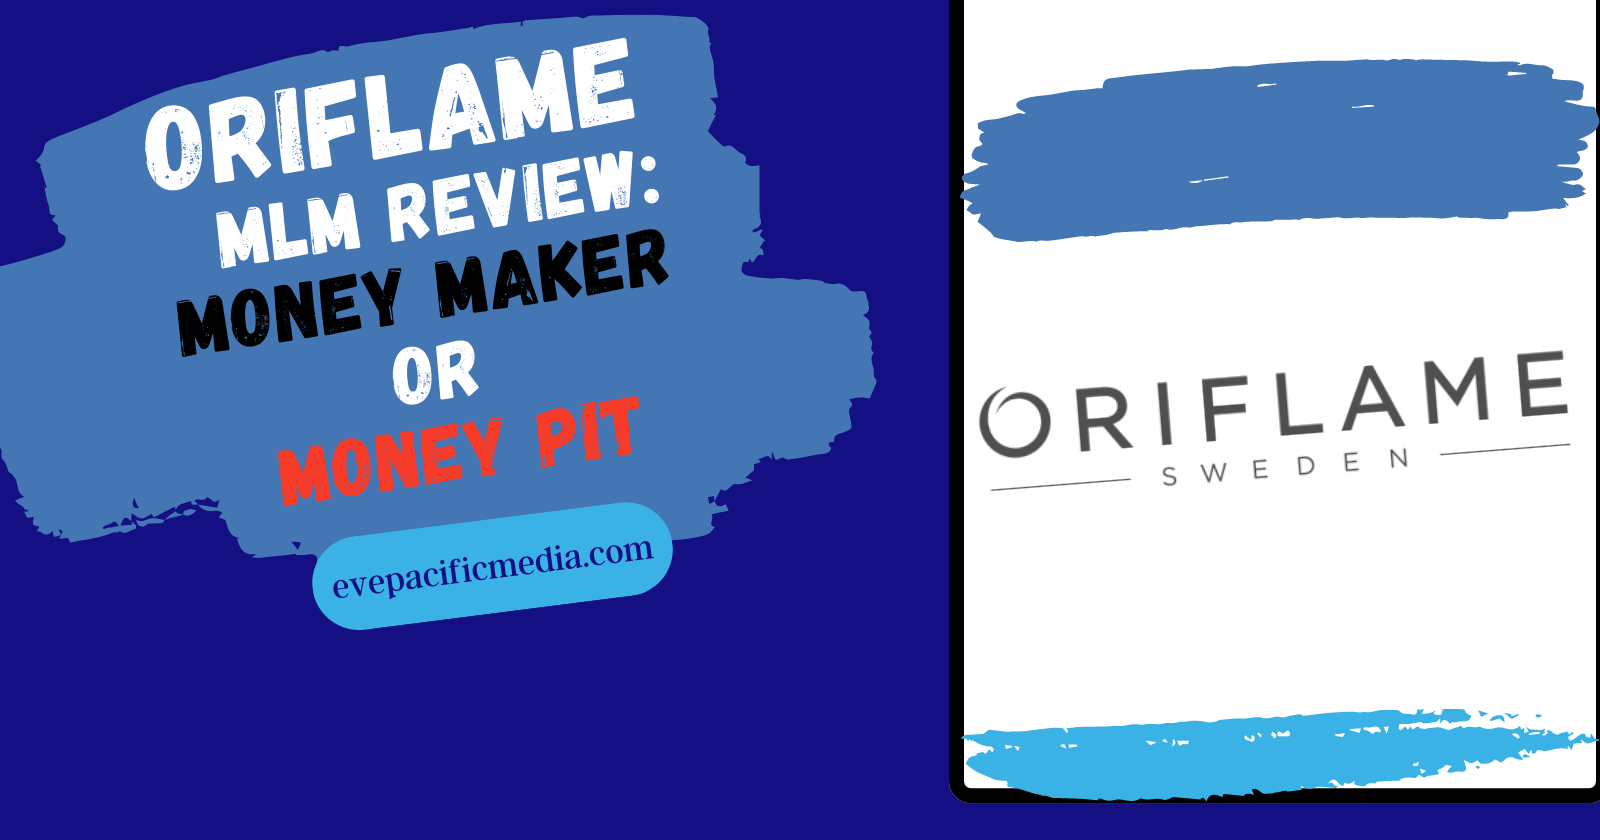 Oriflame Cosmetics MLM Review - Money Maker or Money Pit?